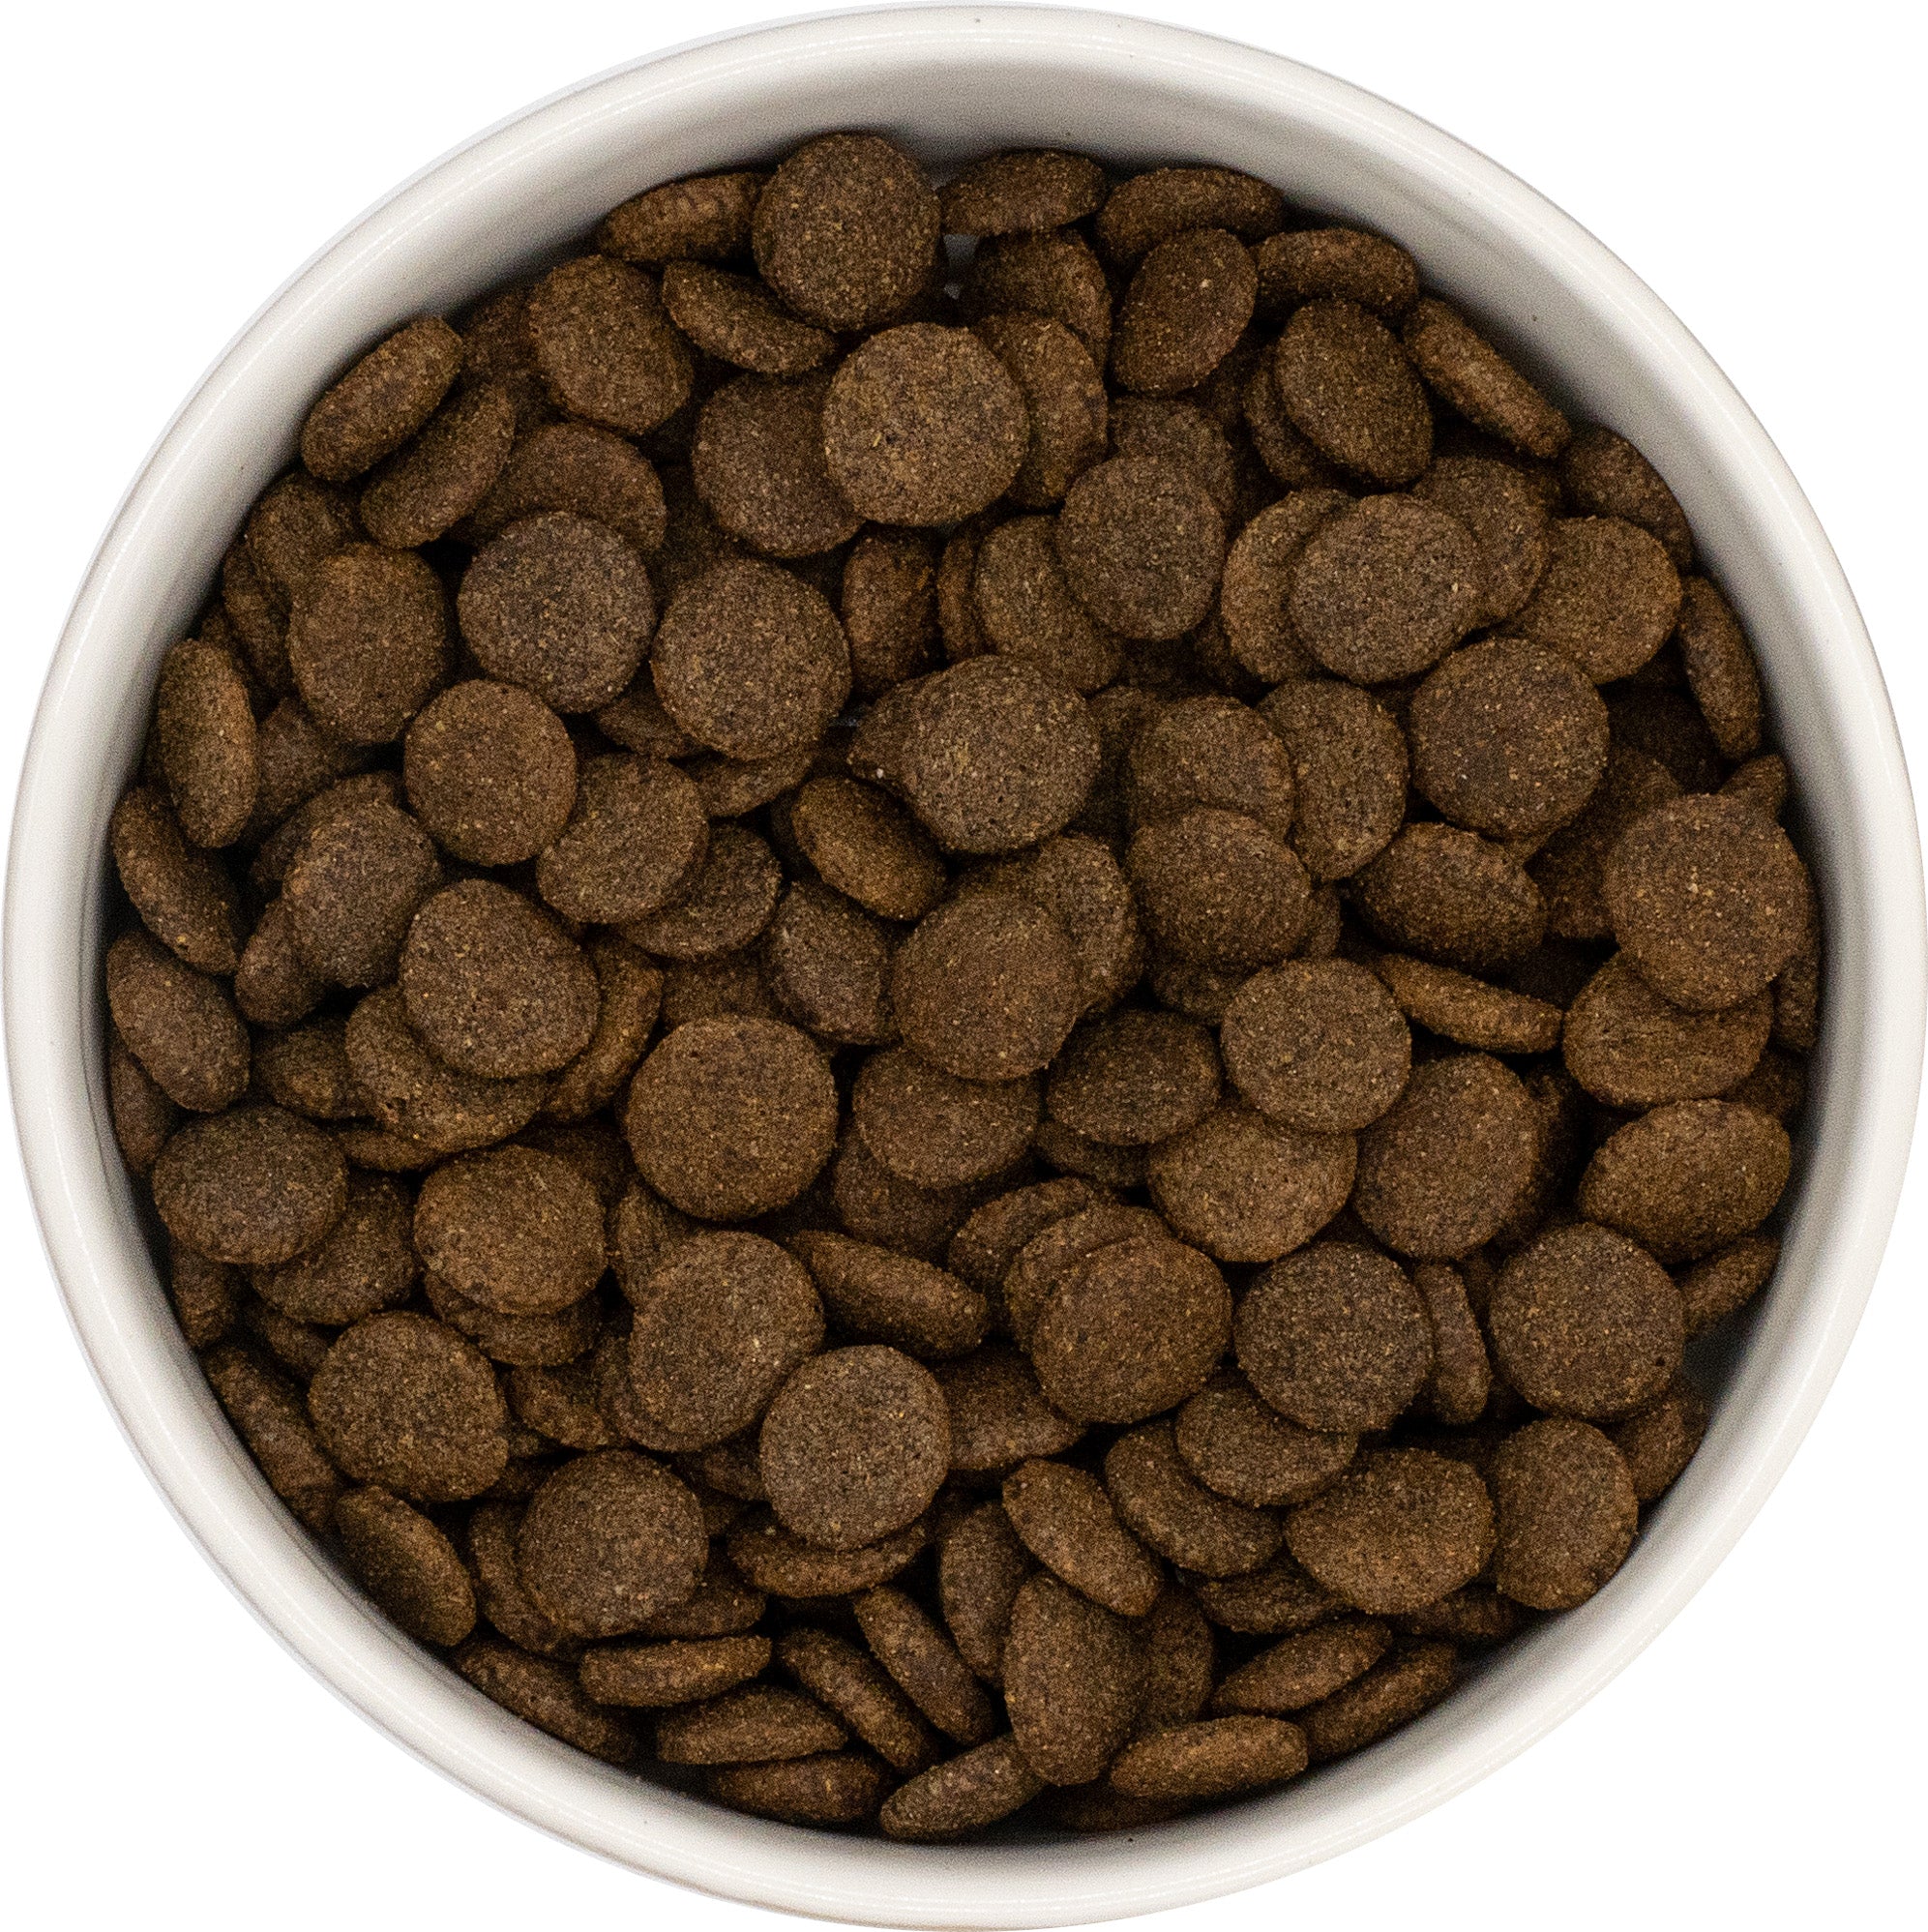 Grain free dog food for Senior dogs made with turkey, sweet potato and cranberry